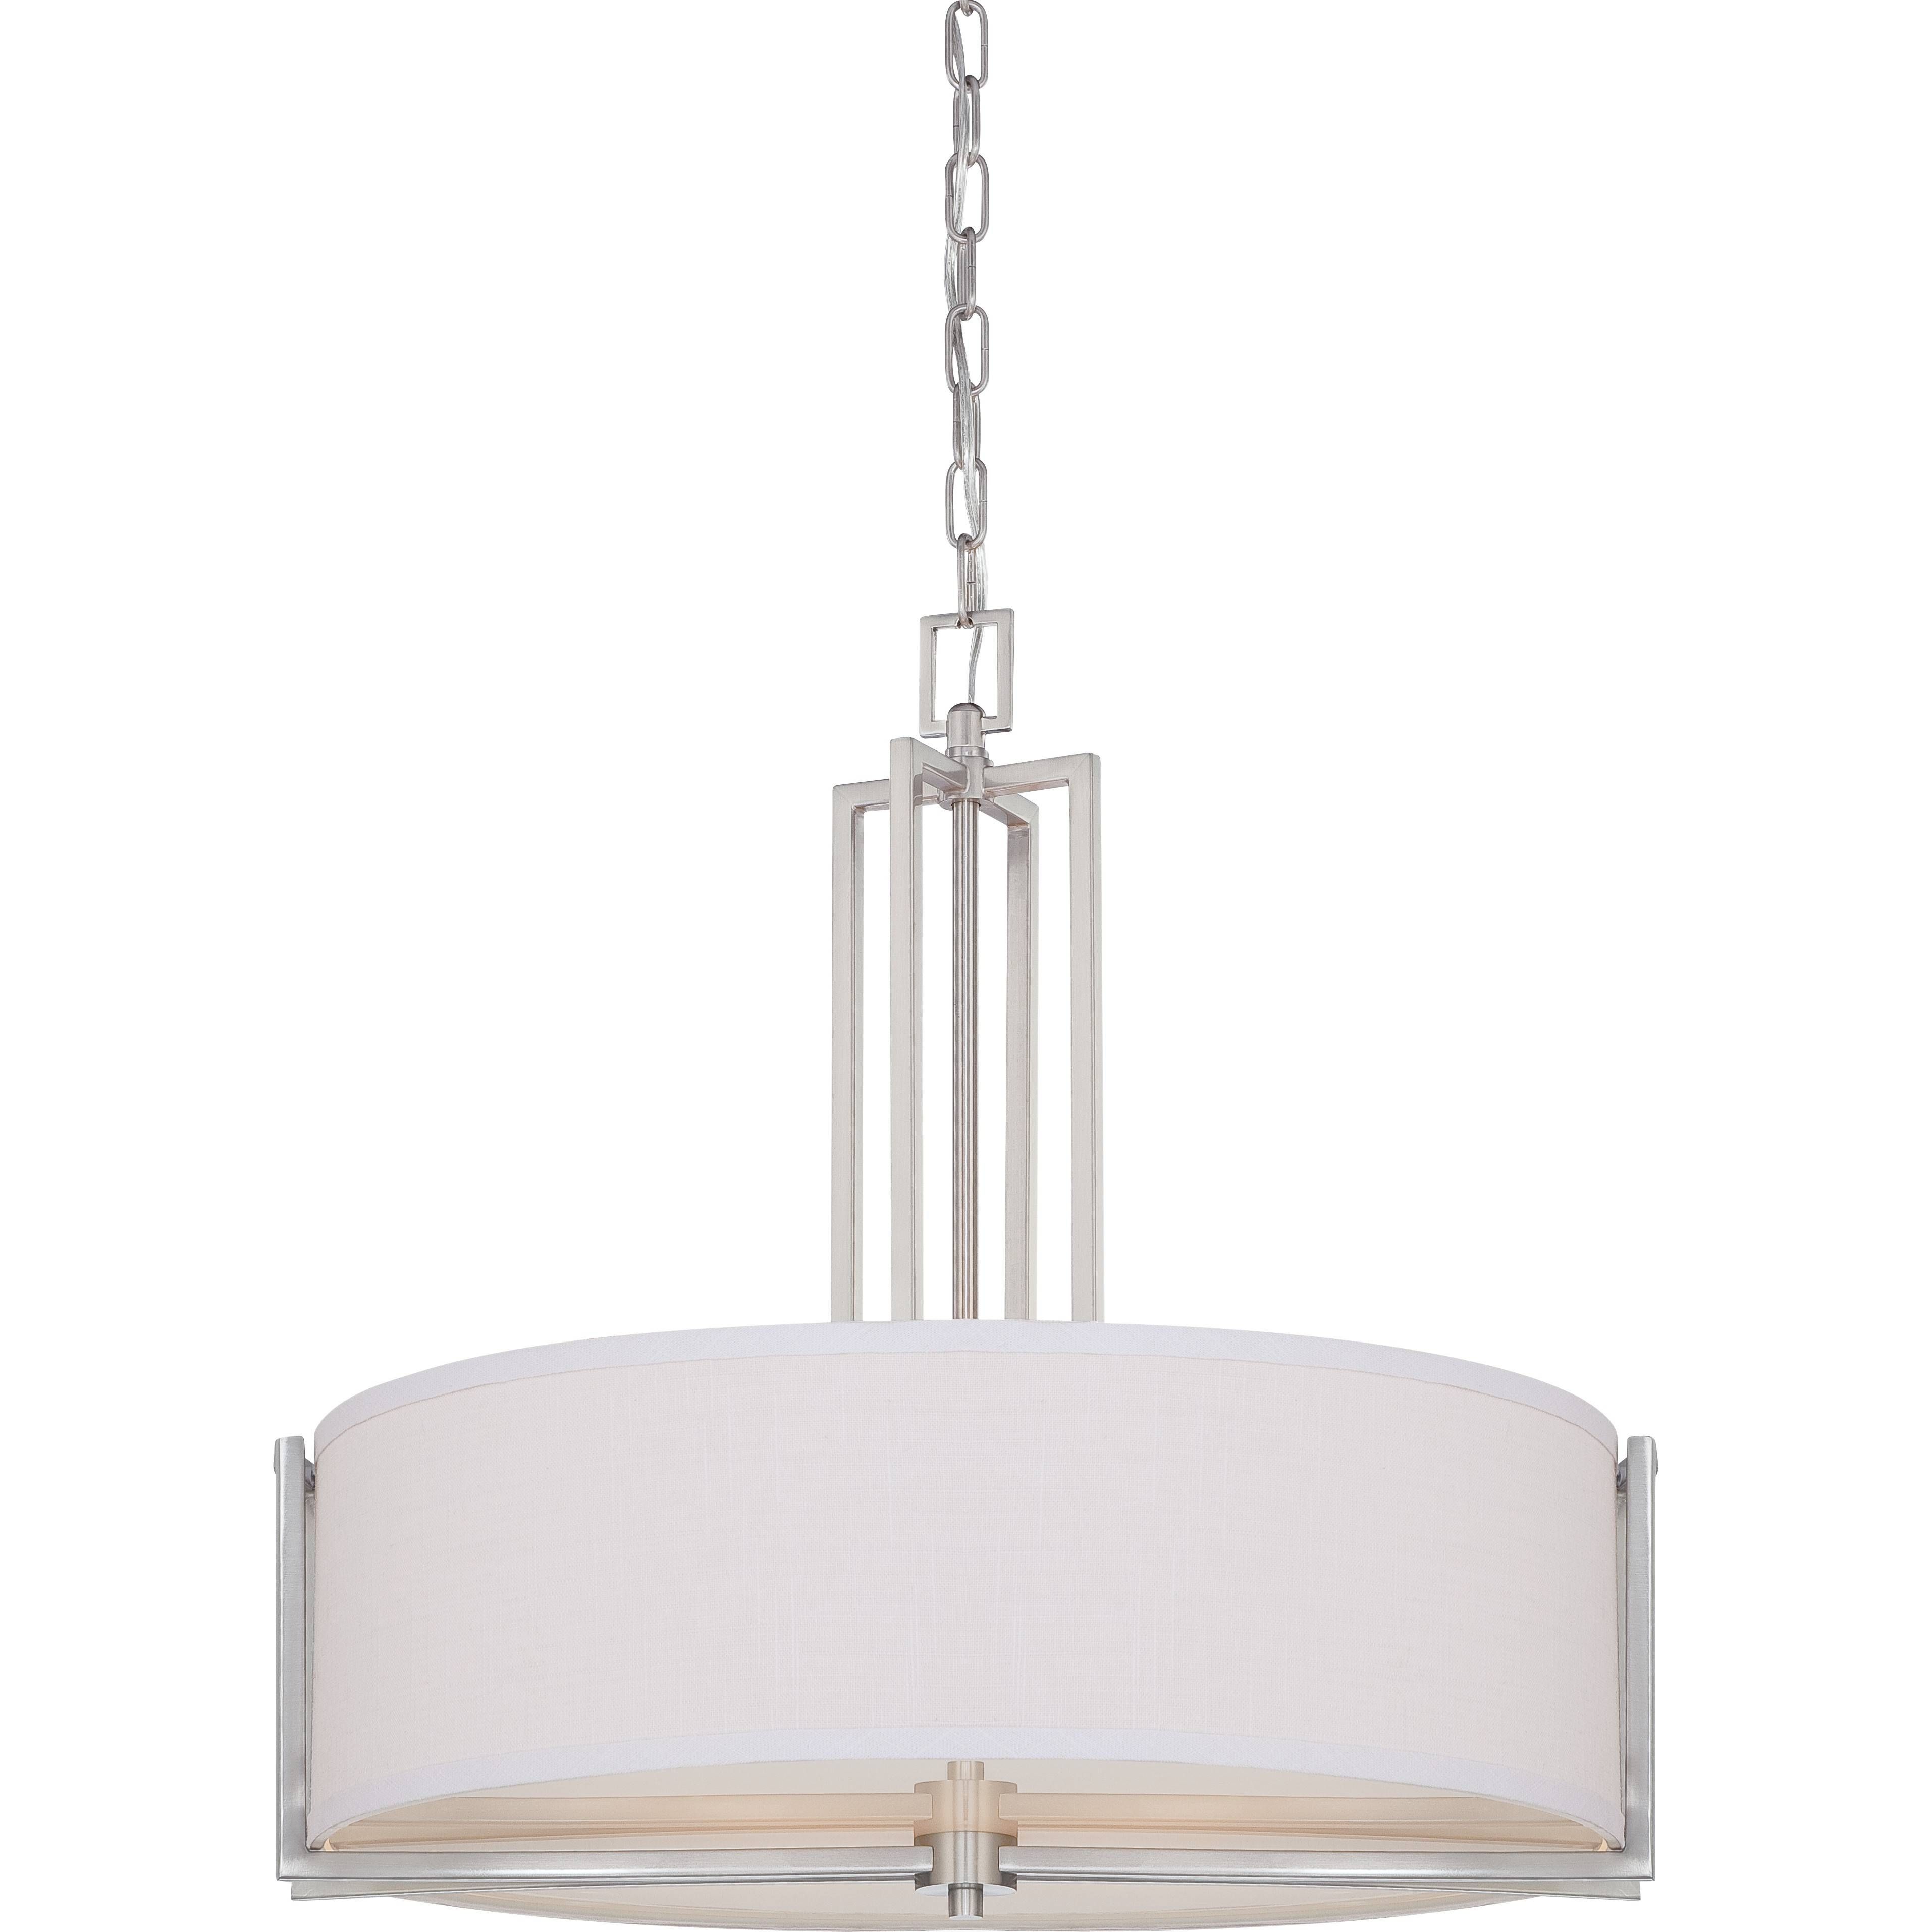 Nuvo 60 4756 | 4 Light Drum Pendant Lighting | Gemini Collection With Brushed Nickel Drum Lights (View 11 of 15)